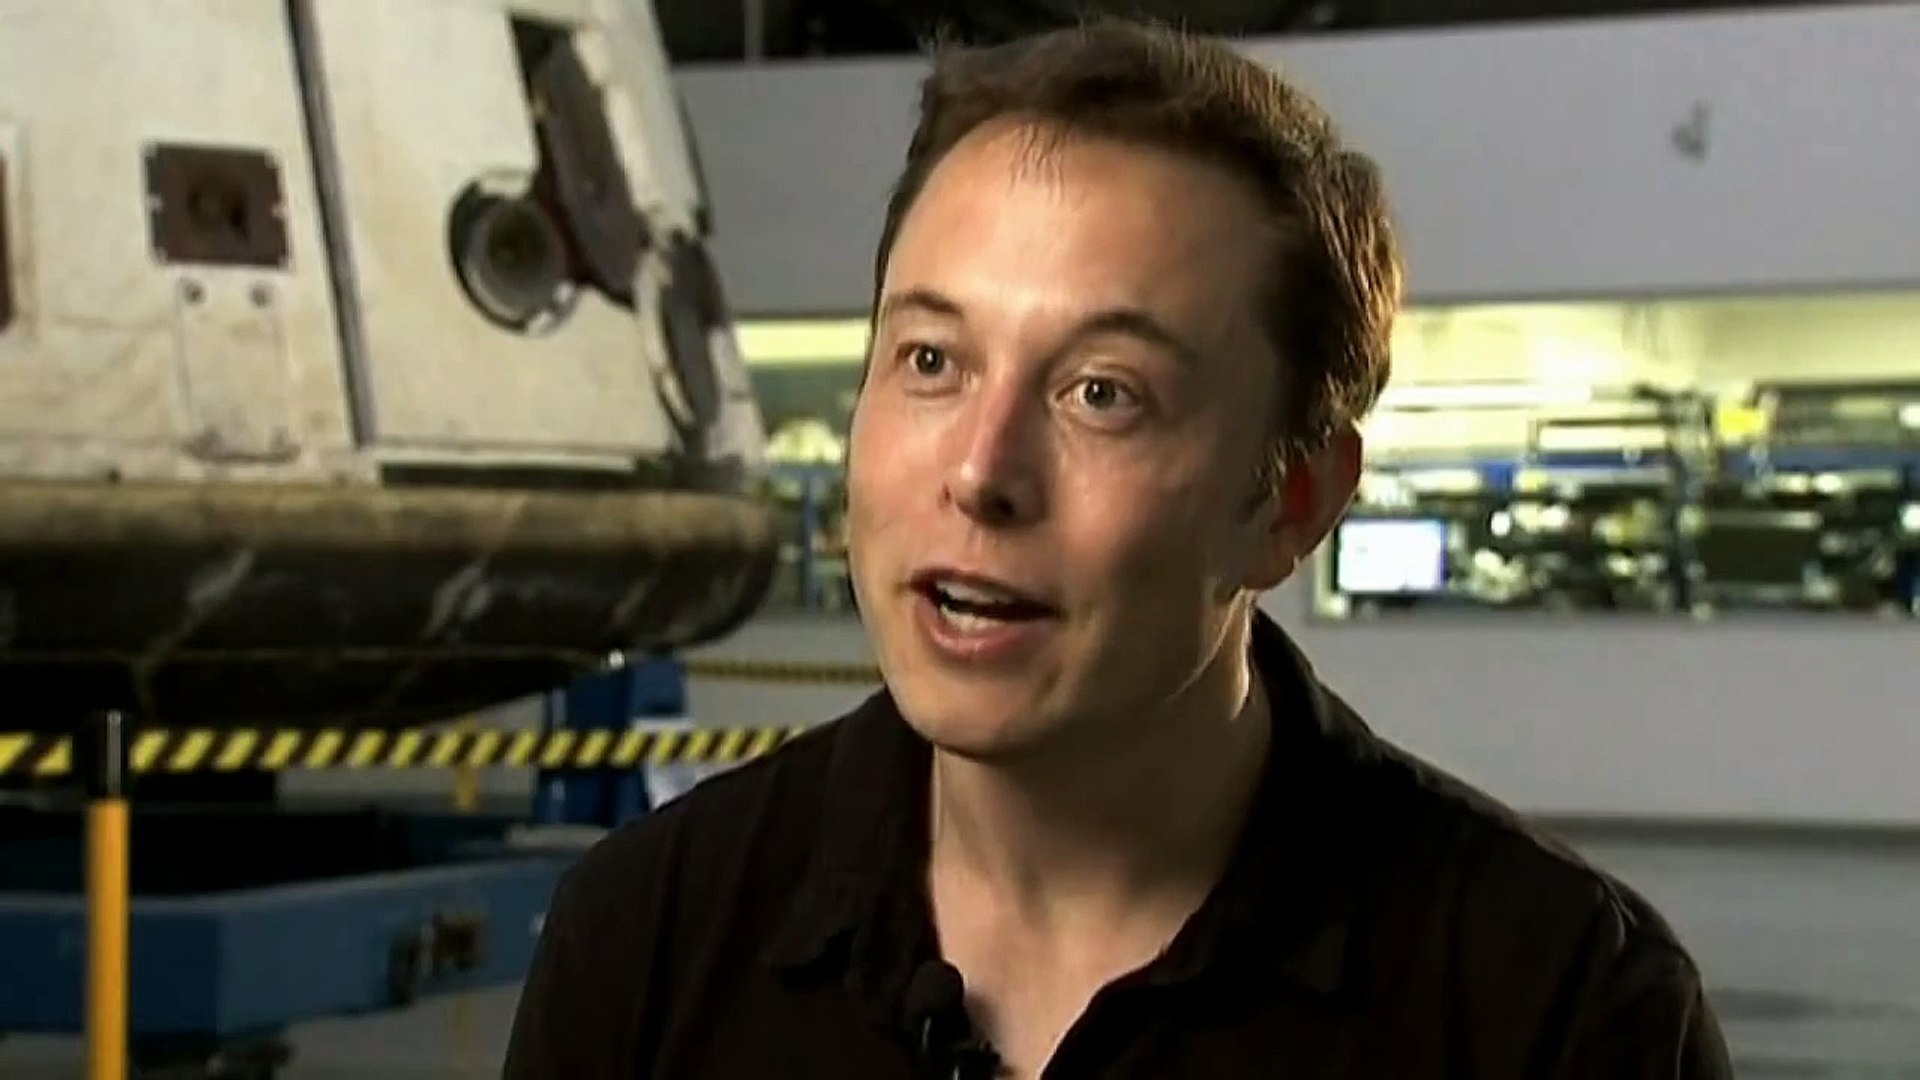 SpaceX: Elon Musk wants to make history